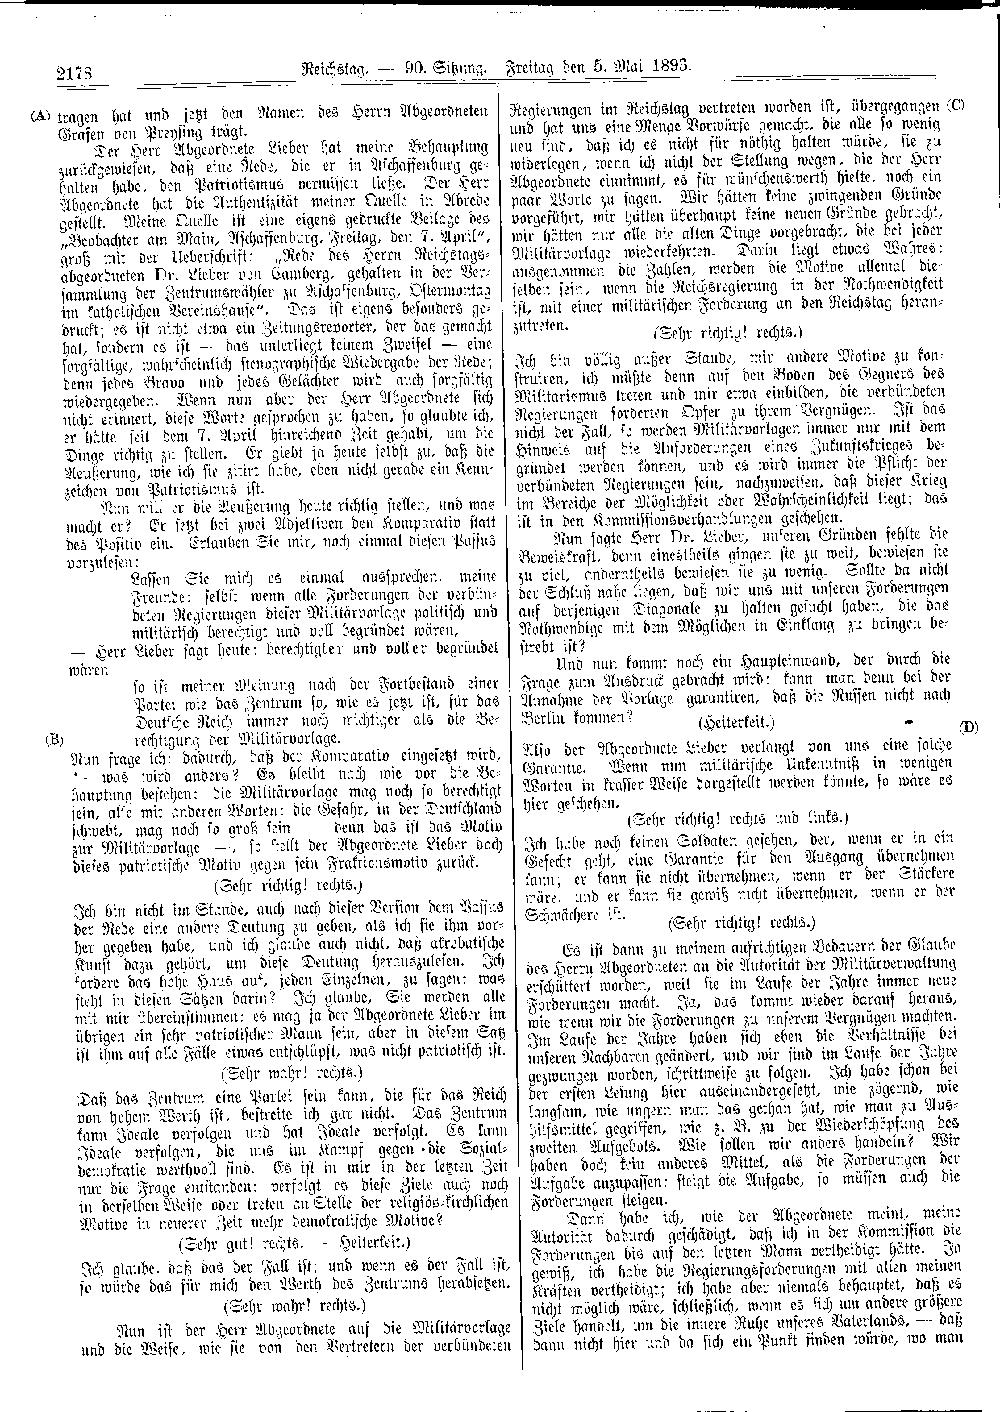 Scan of page 2178